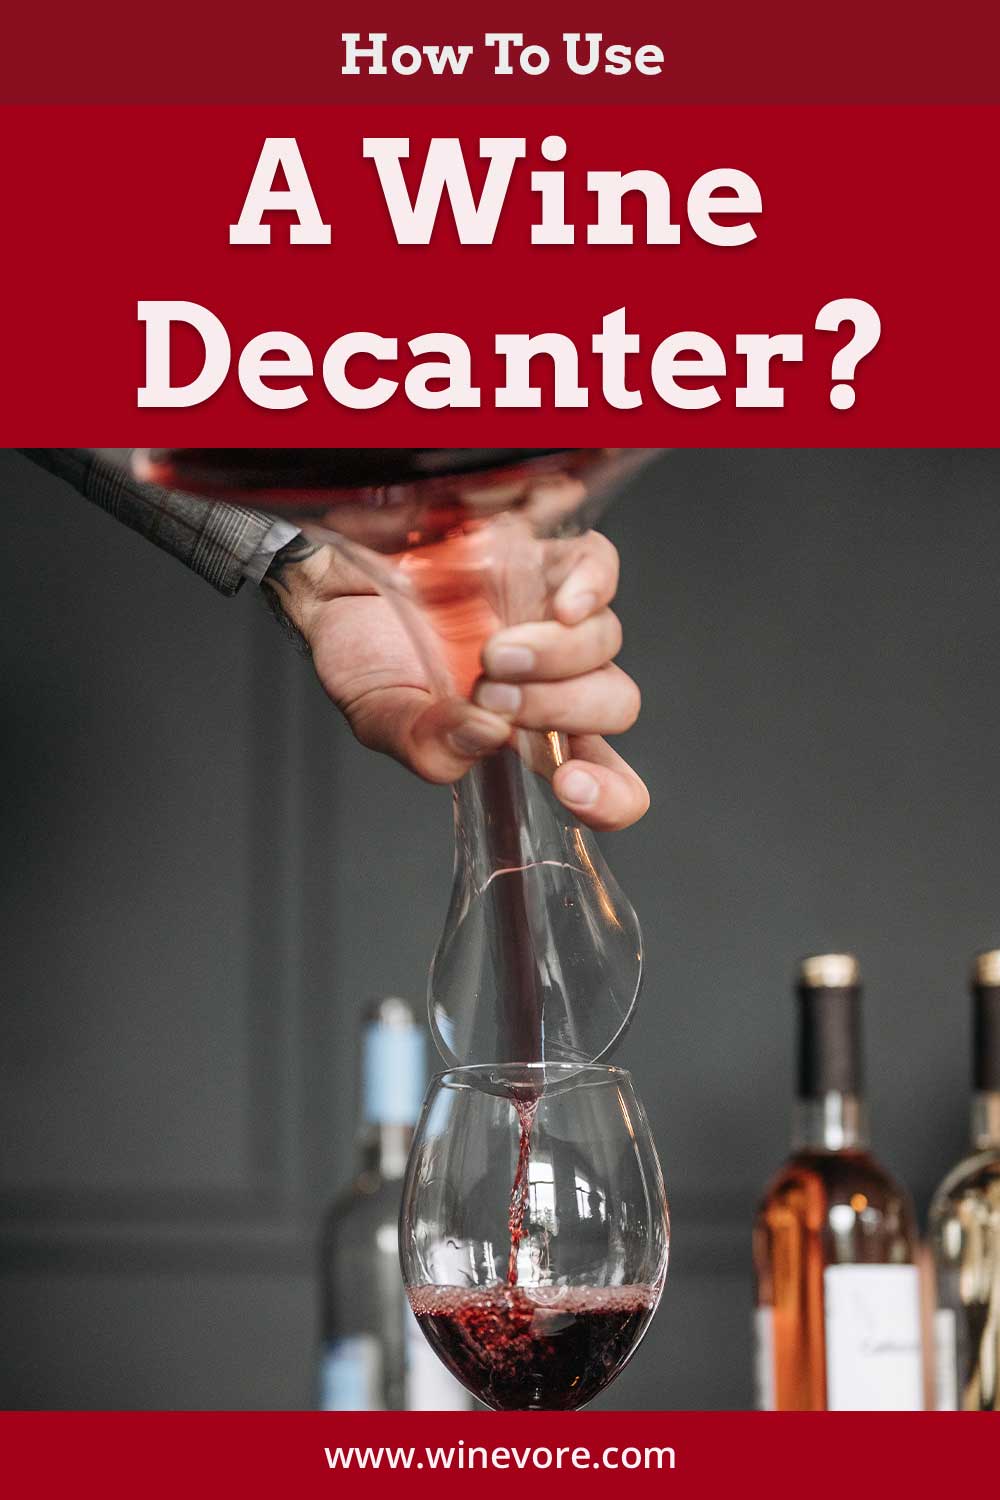 Pouring red wine into a bottle from a wine decanter - How To Use A Wine Decanter?